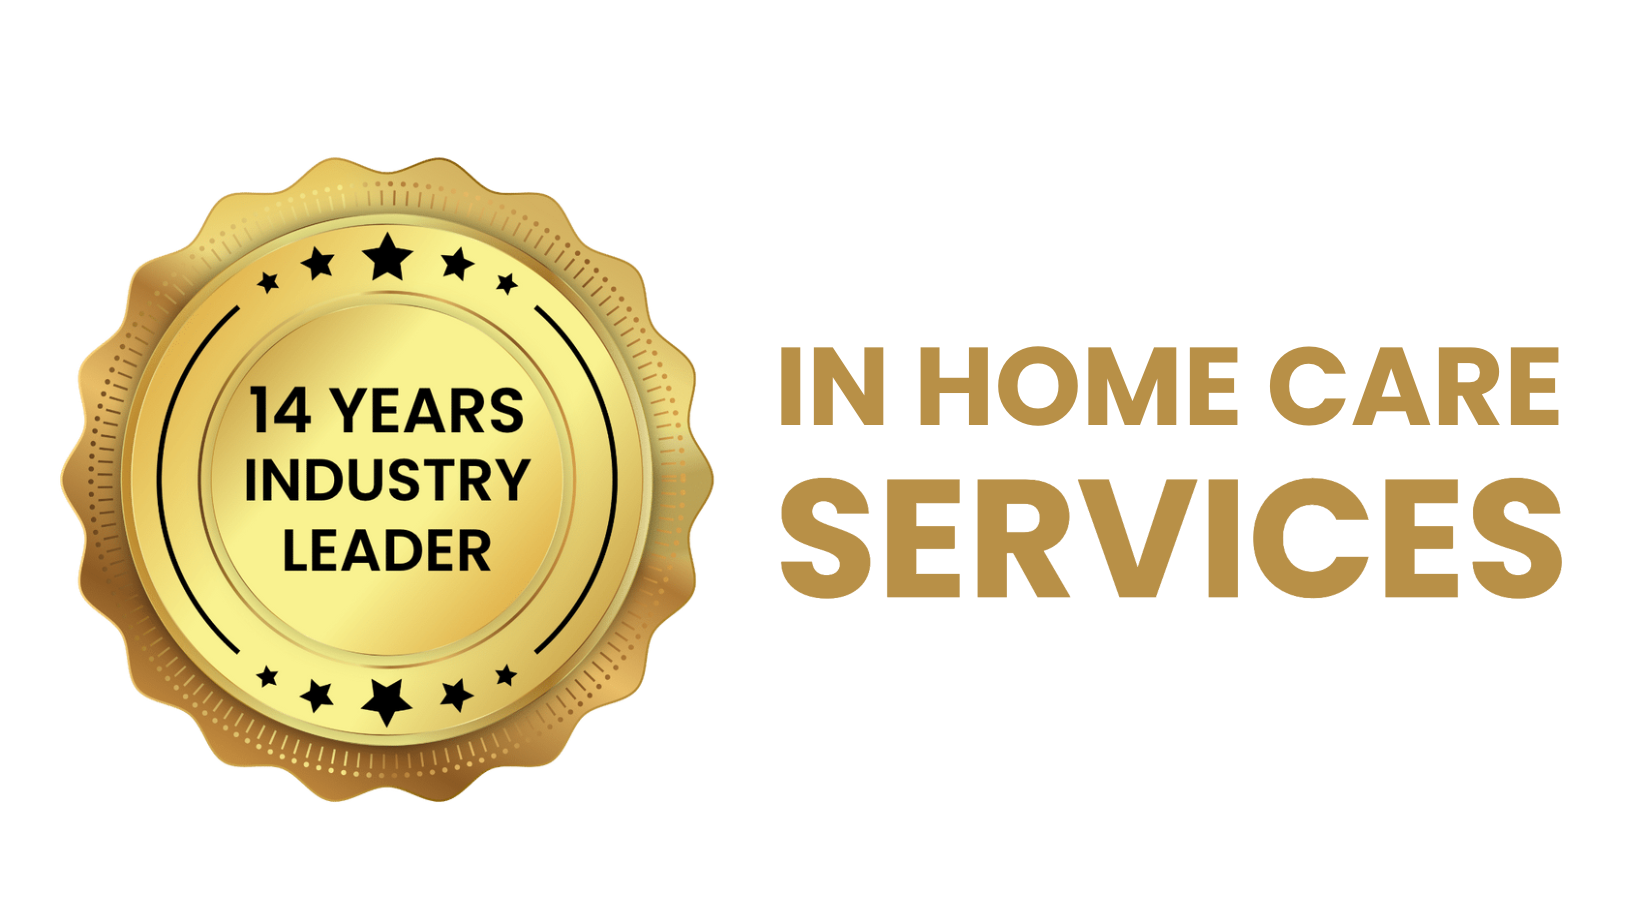 Premier Homecare Angels 14 Years of Excellence as Home Care Industry Leader